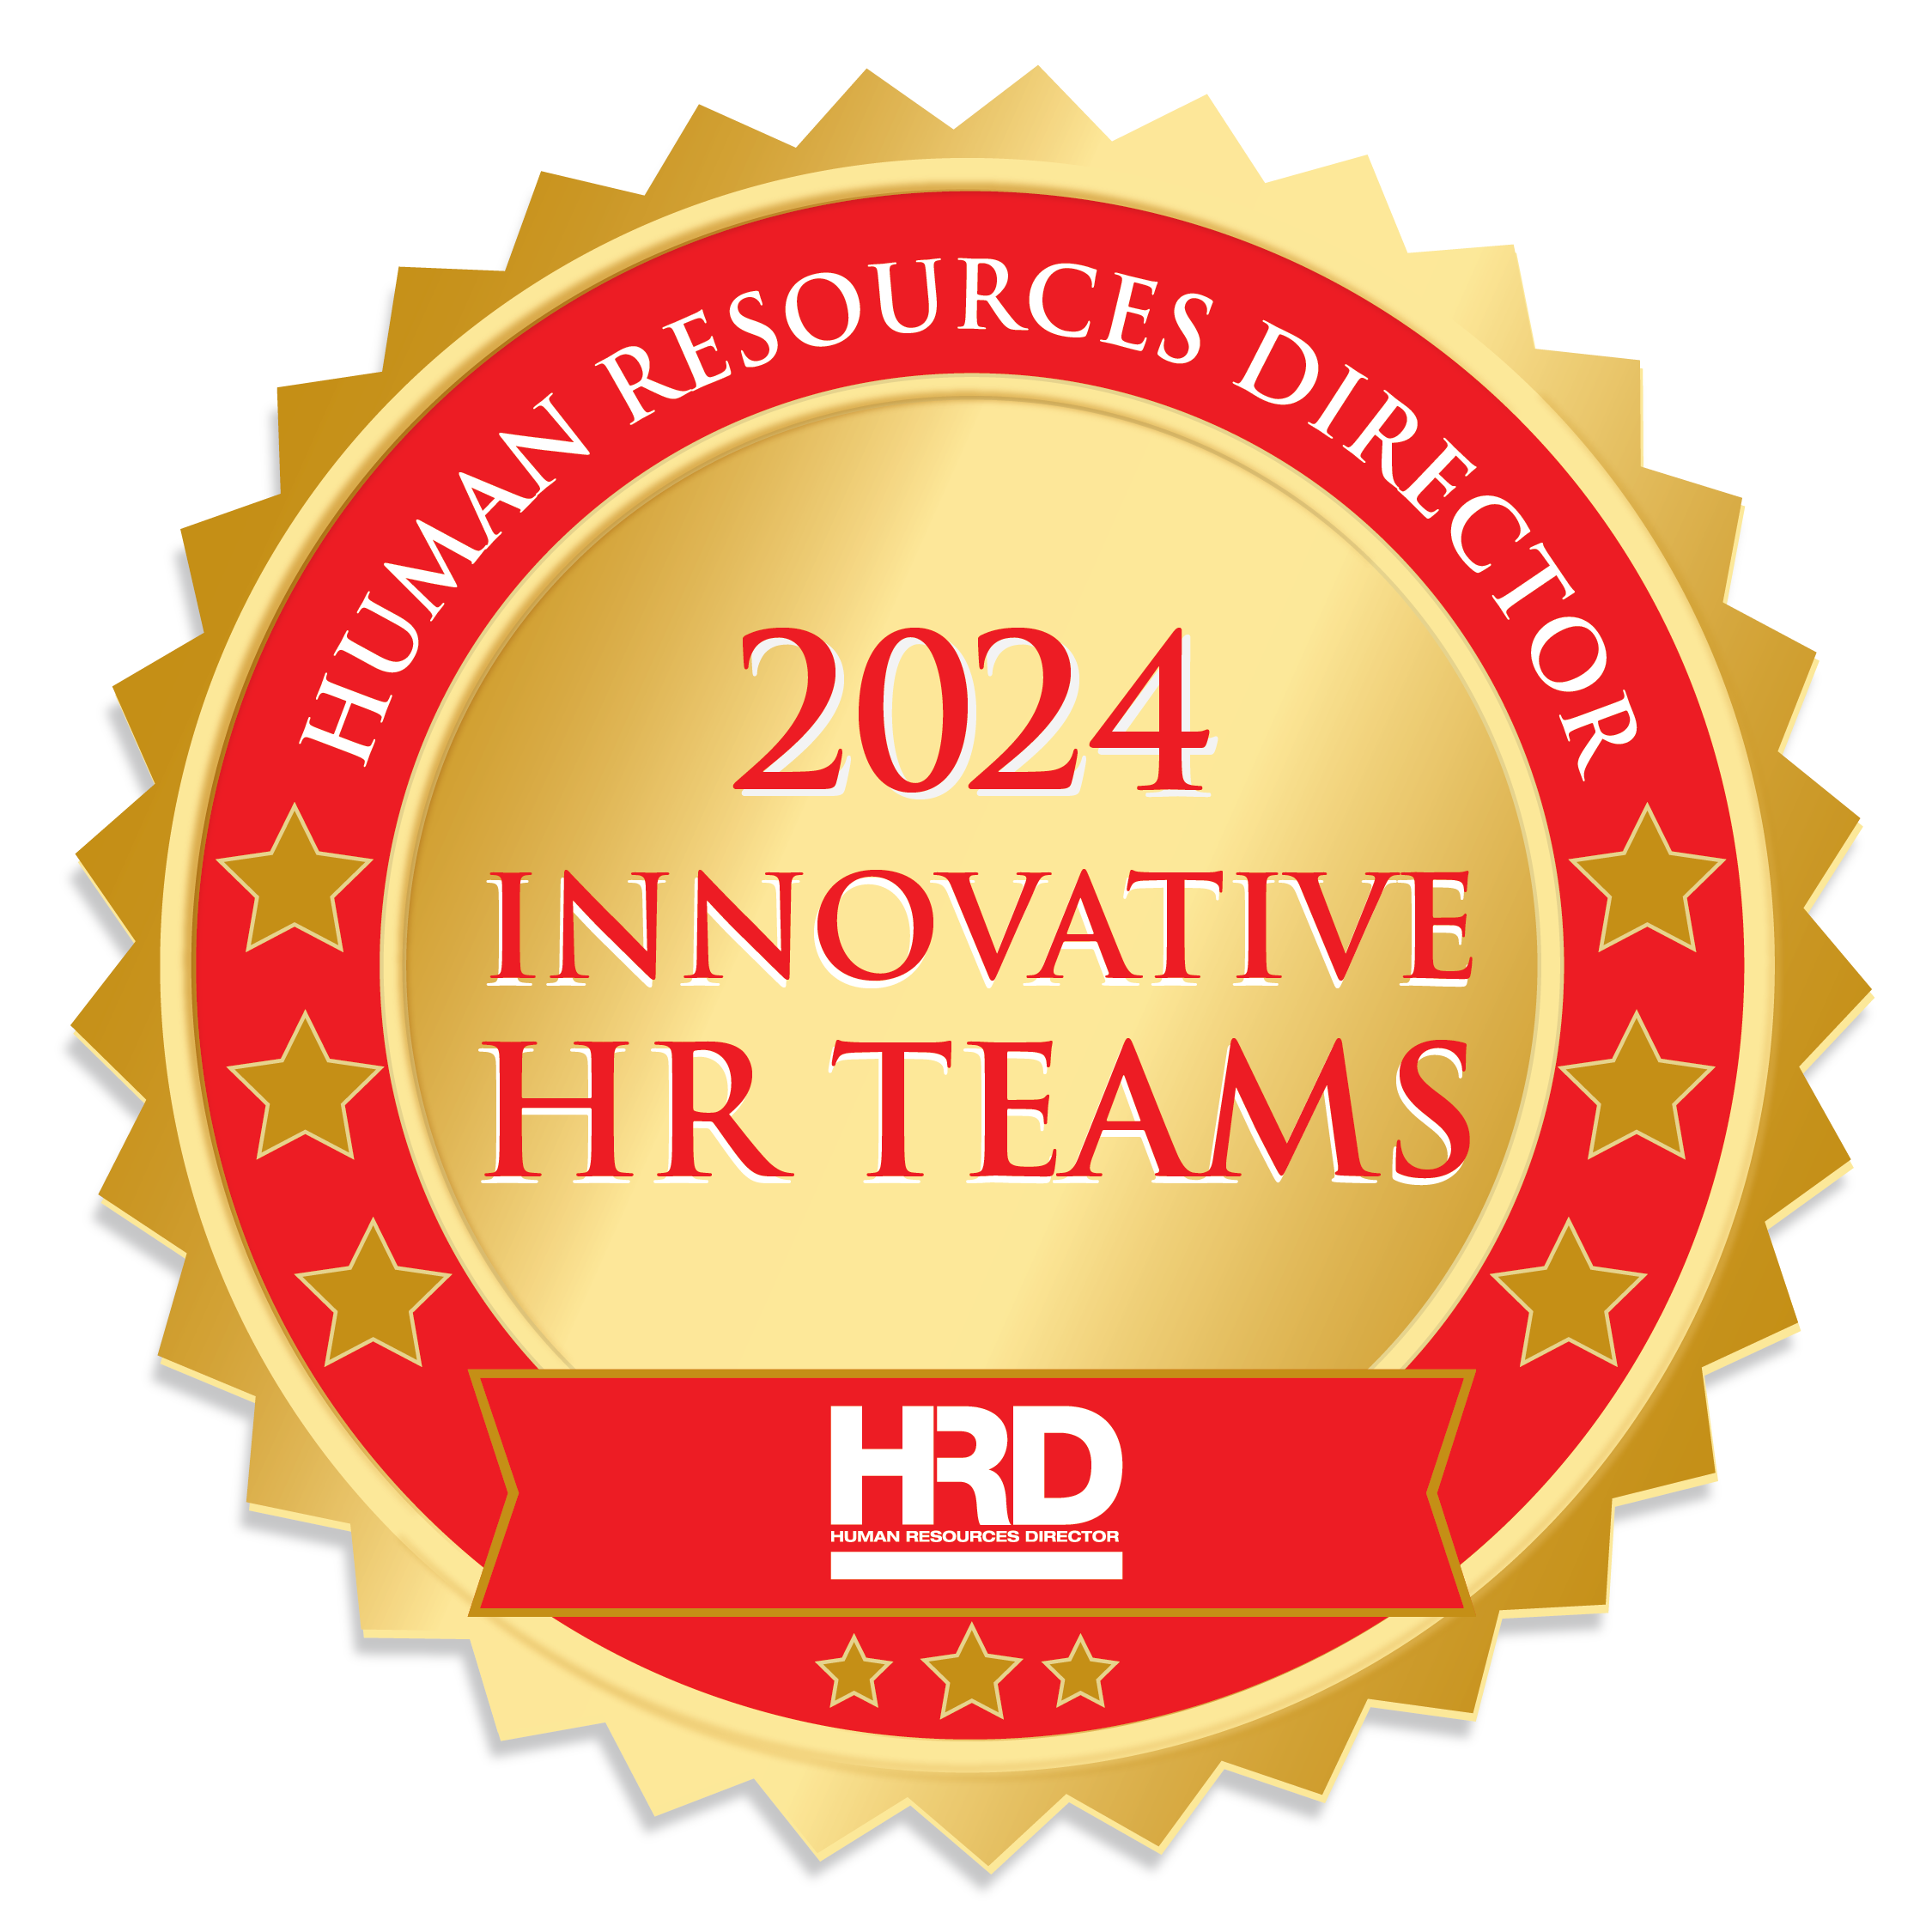 The Best HR Teams for Innovation in Asia